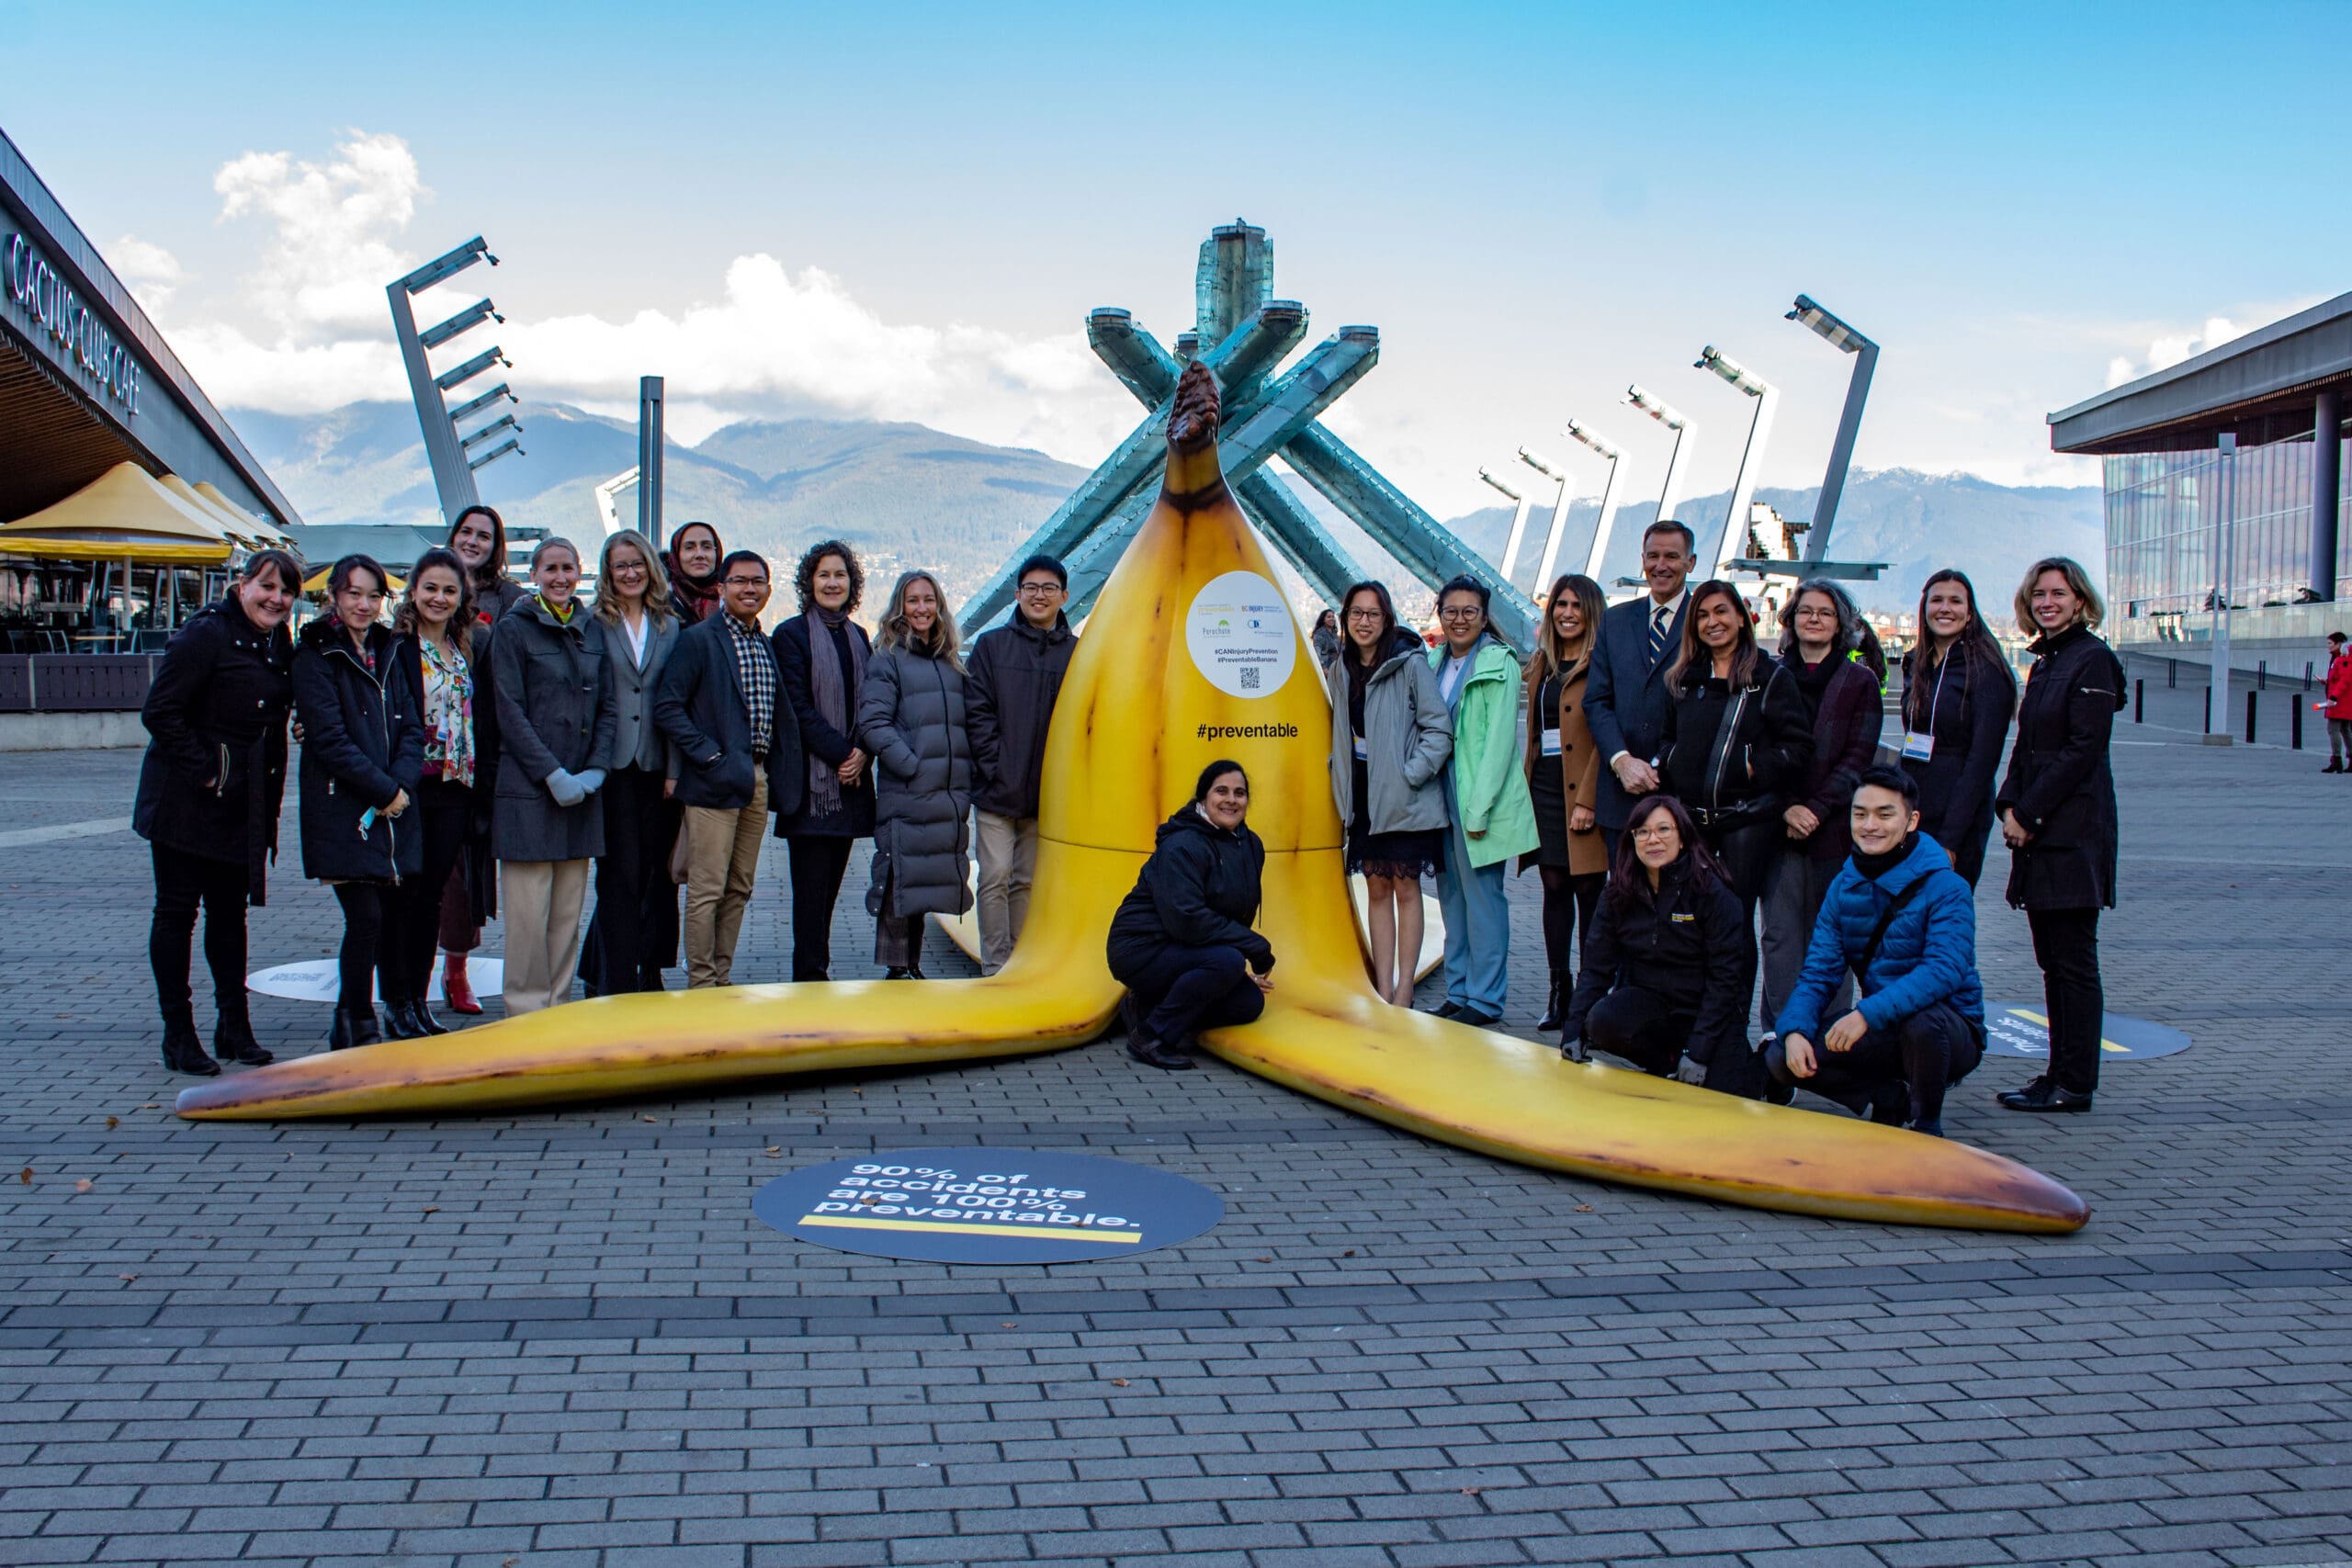 The team at the BC Injury Research and Prevention Unit by the Big Banana display in November 2022